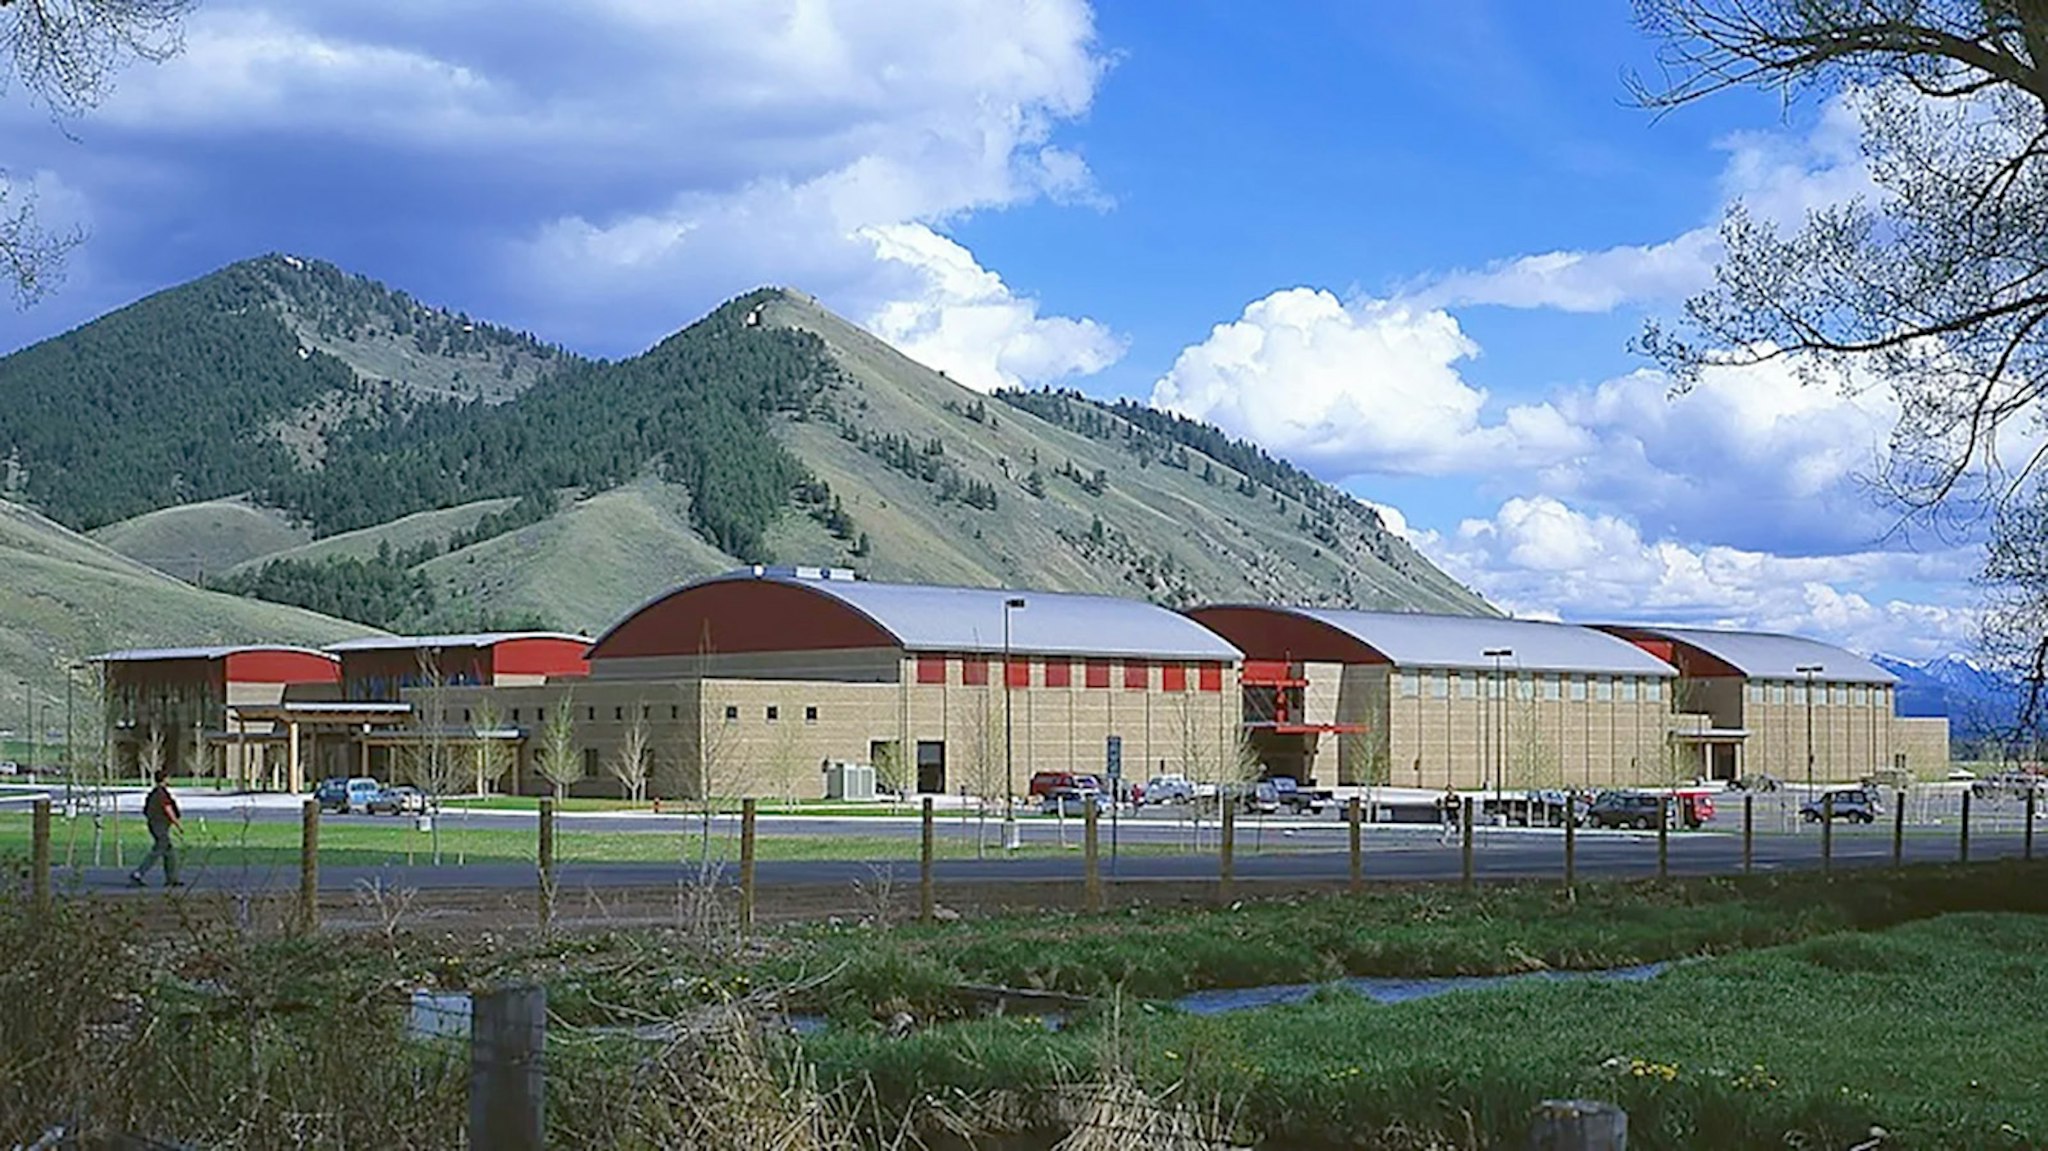 Teton County School District Settles Sexual Harassment Claims With Feds